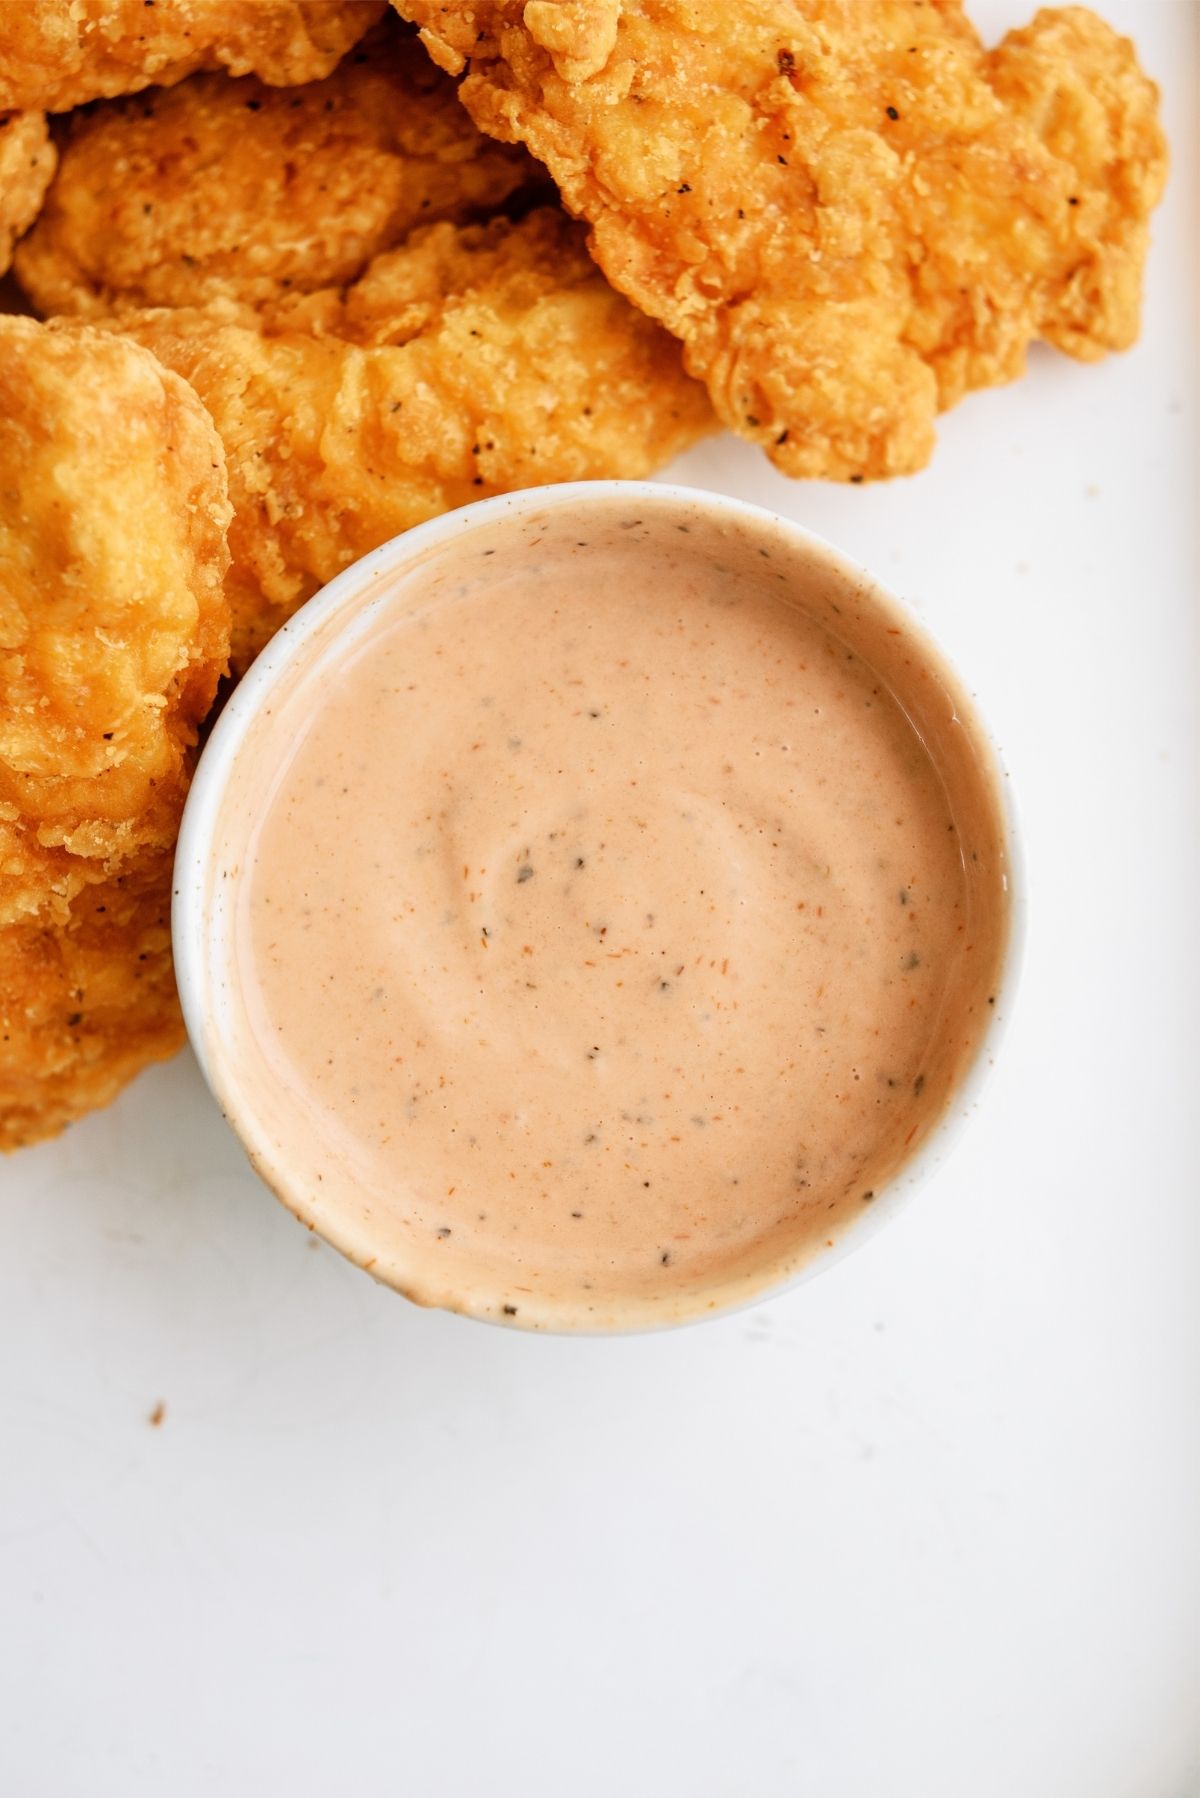 Raising Cane’s Chicken Sauce in a bowl with a side of chicken tenders on a plate